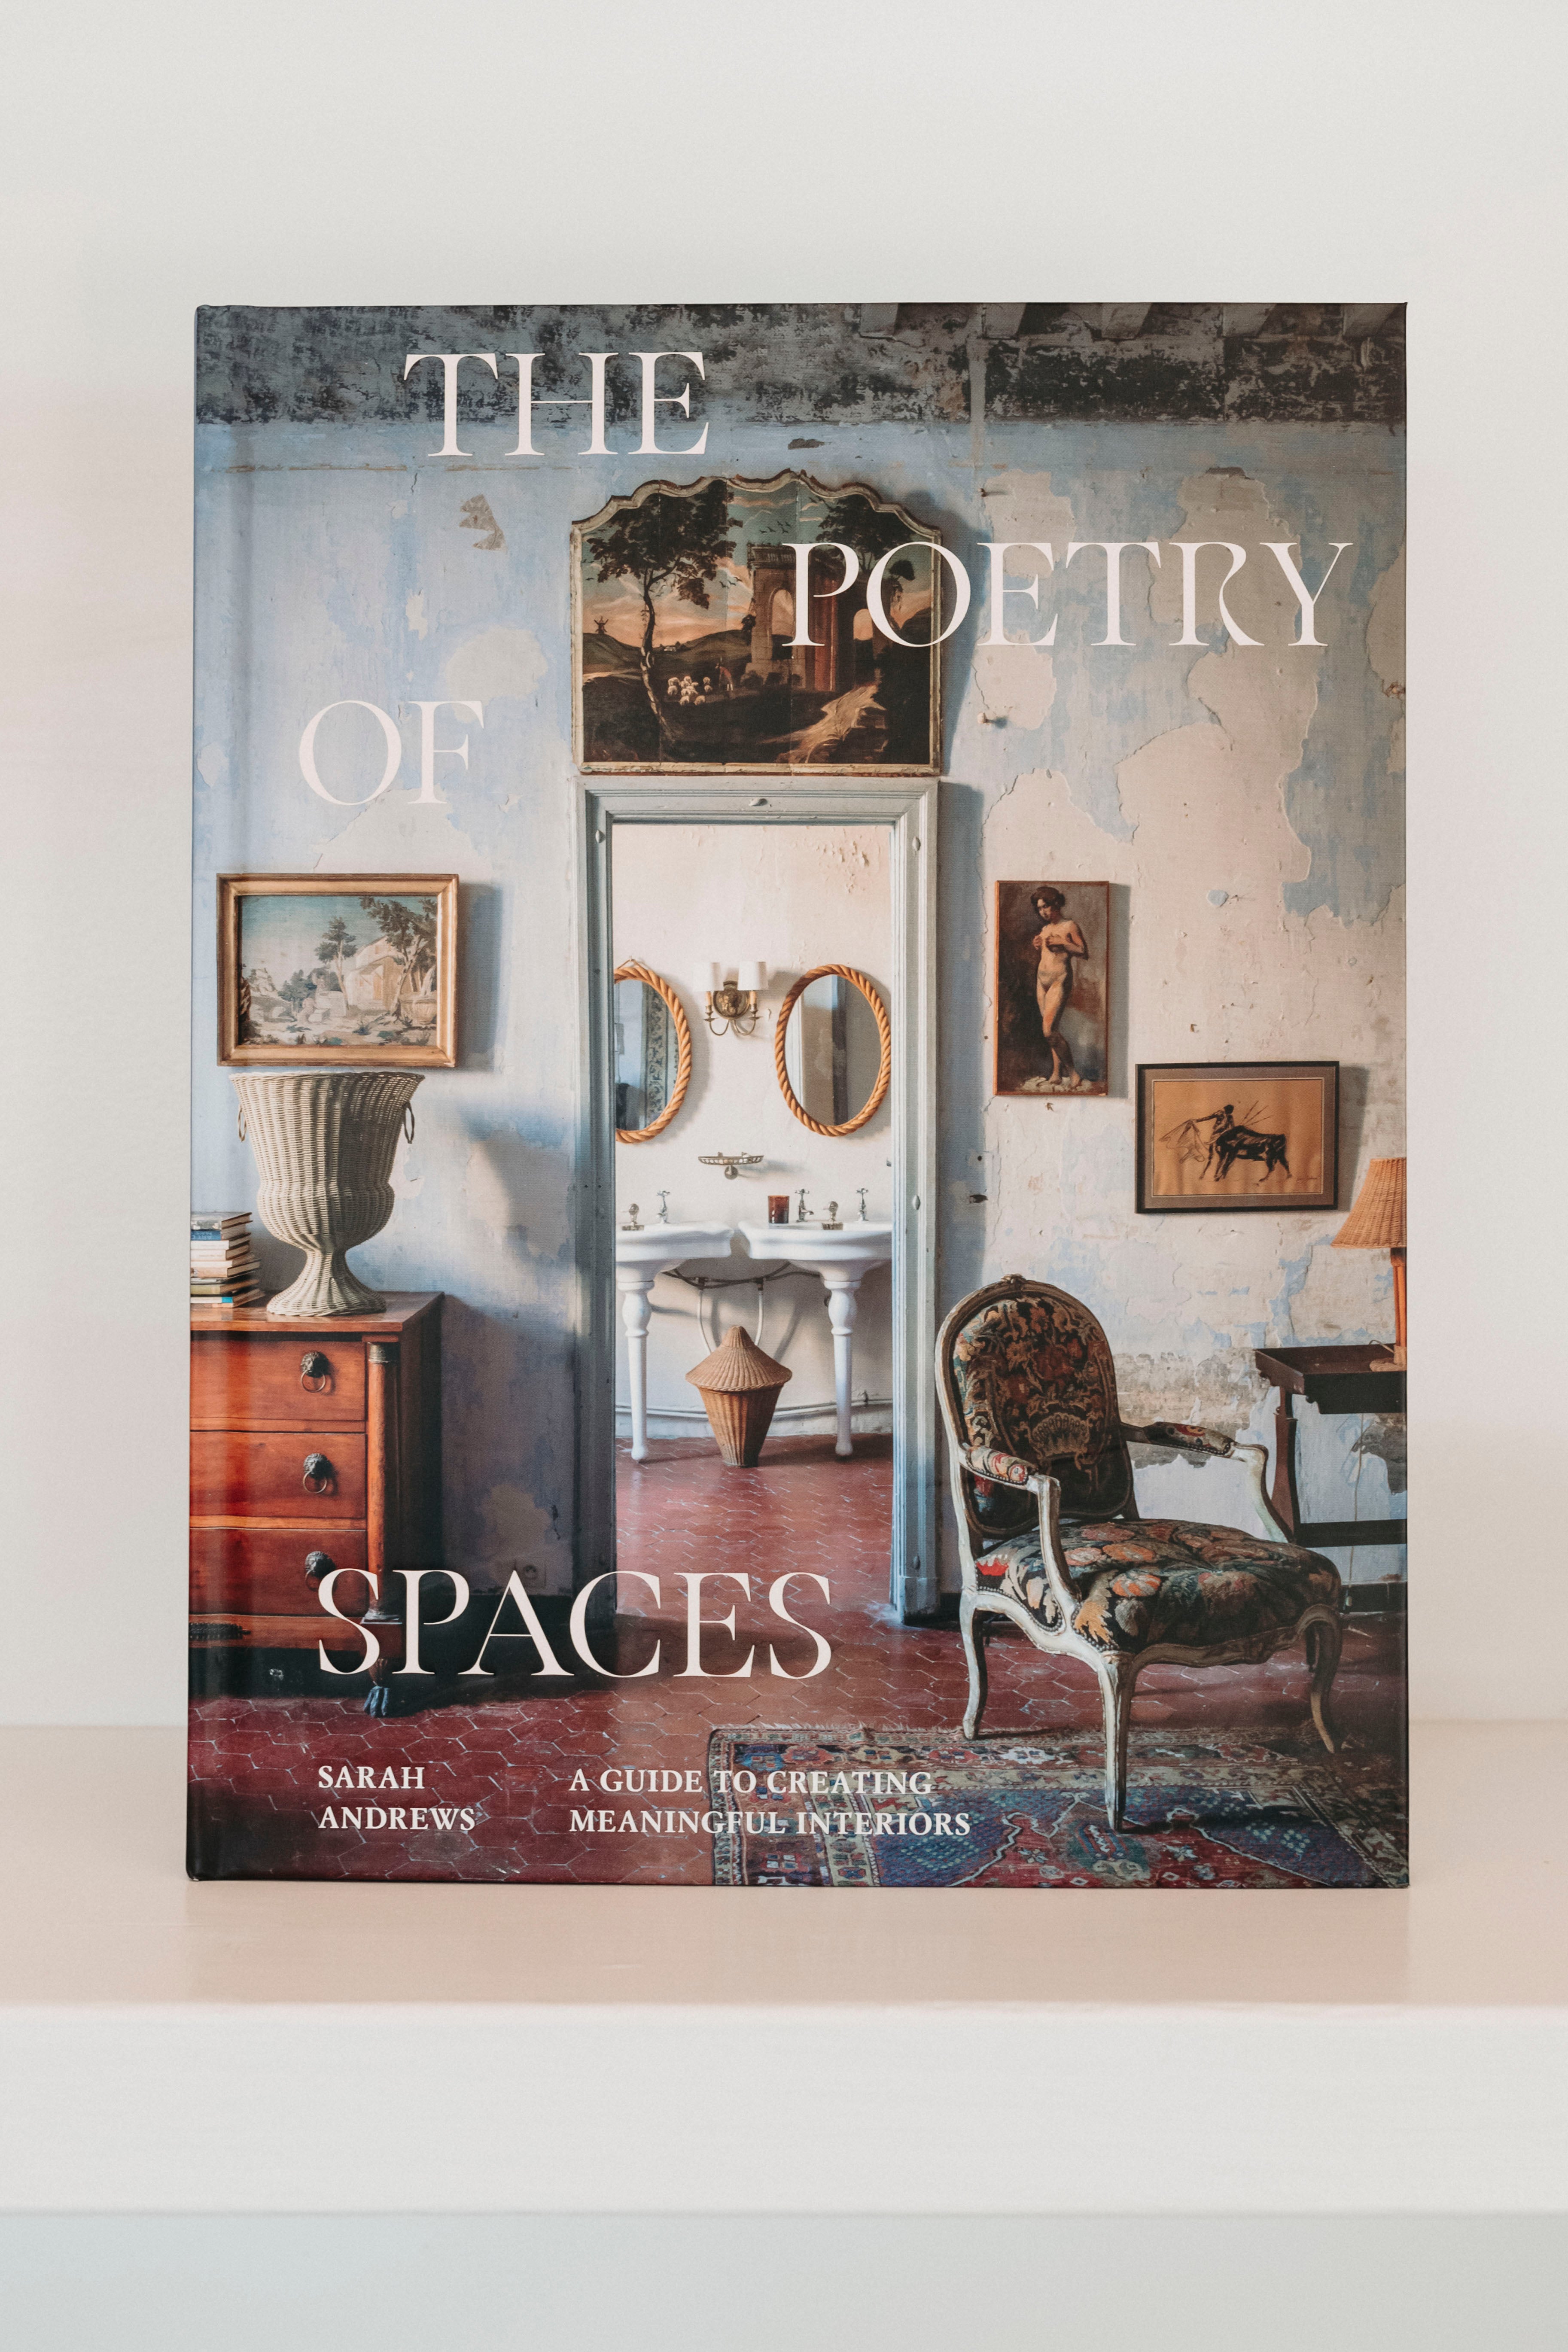 THE POETRY OF SPACES